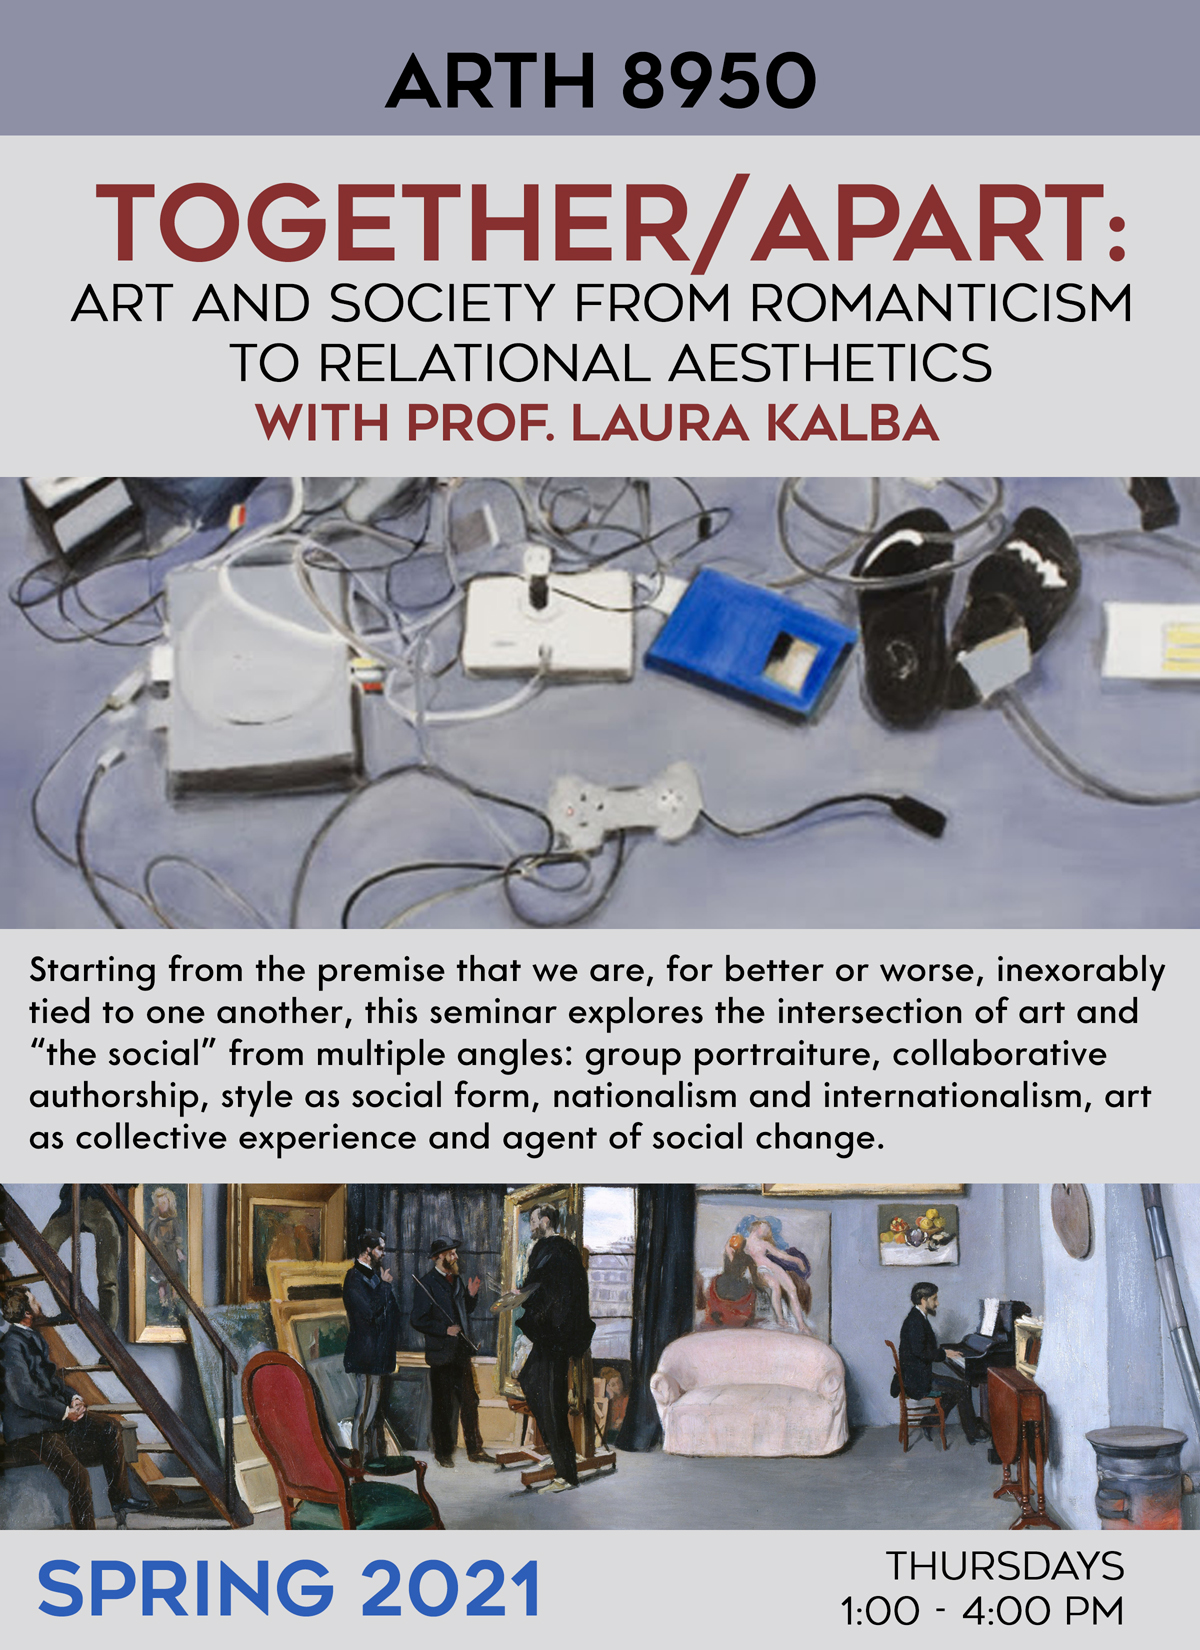 Course Poster for ARTH 8950 Together/Apart: Art and Society from Romanticism to Relational Aesthetics. Text: Starting from the premise that we are, for better or worse, inexorably tied to one another, this seminar explores the intersection of art and "the